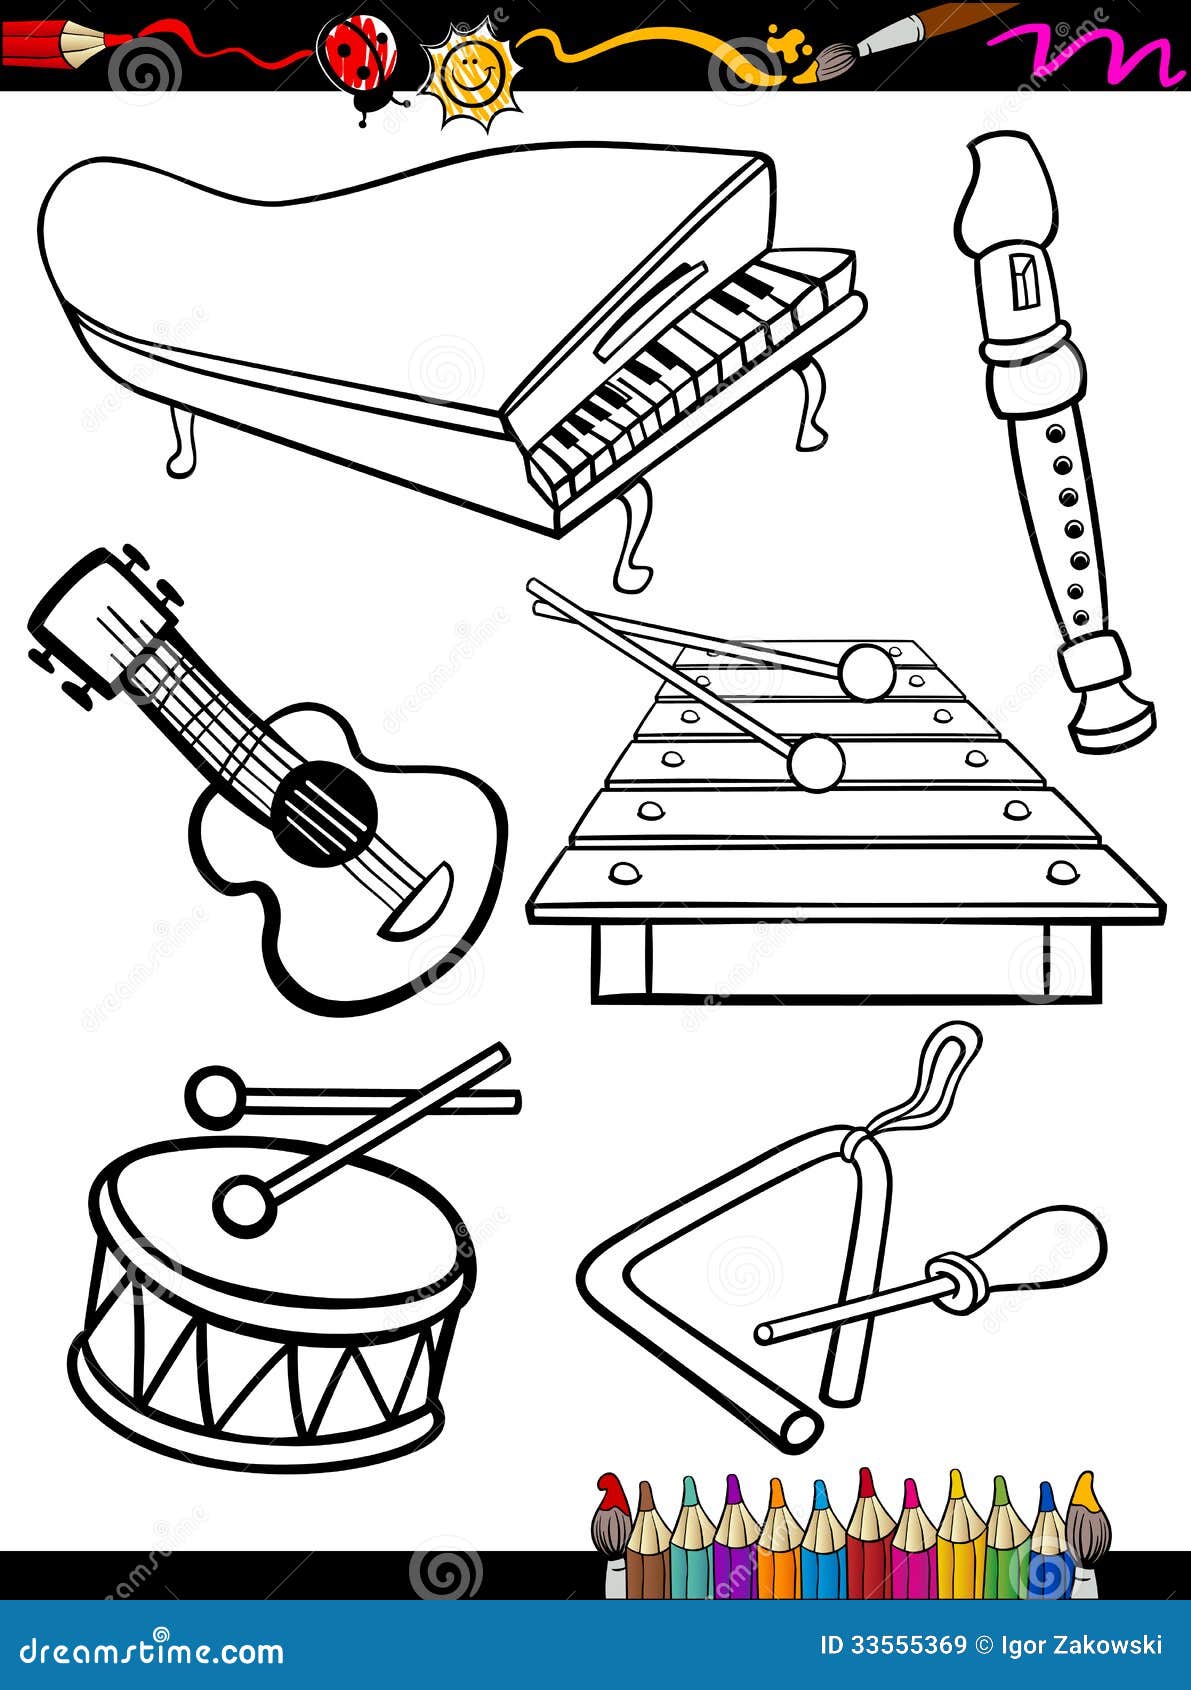 instruments coloring pages - photo #36